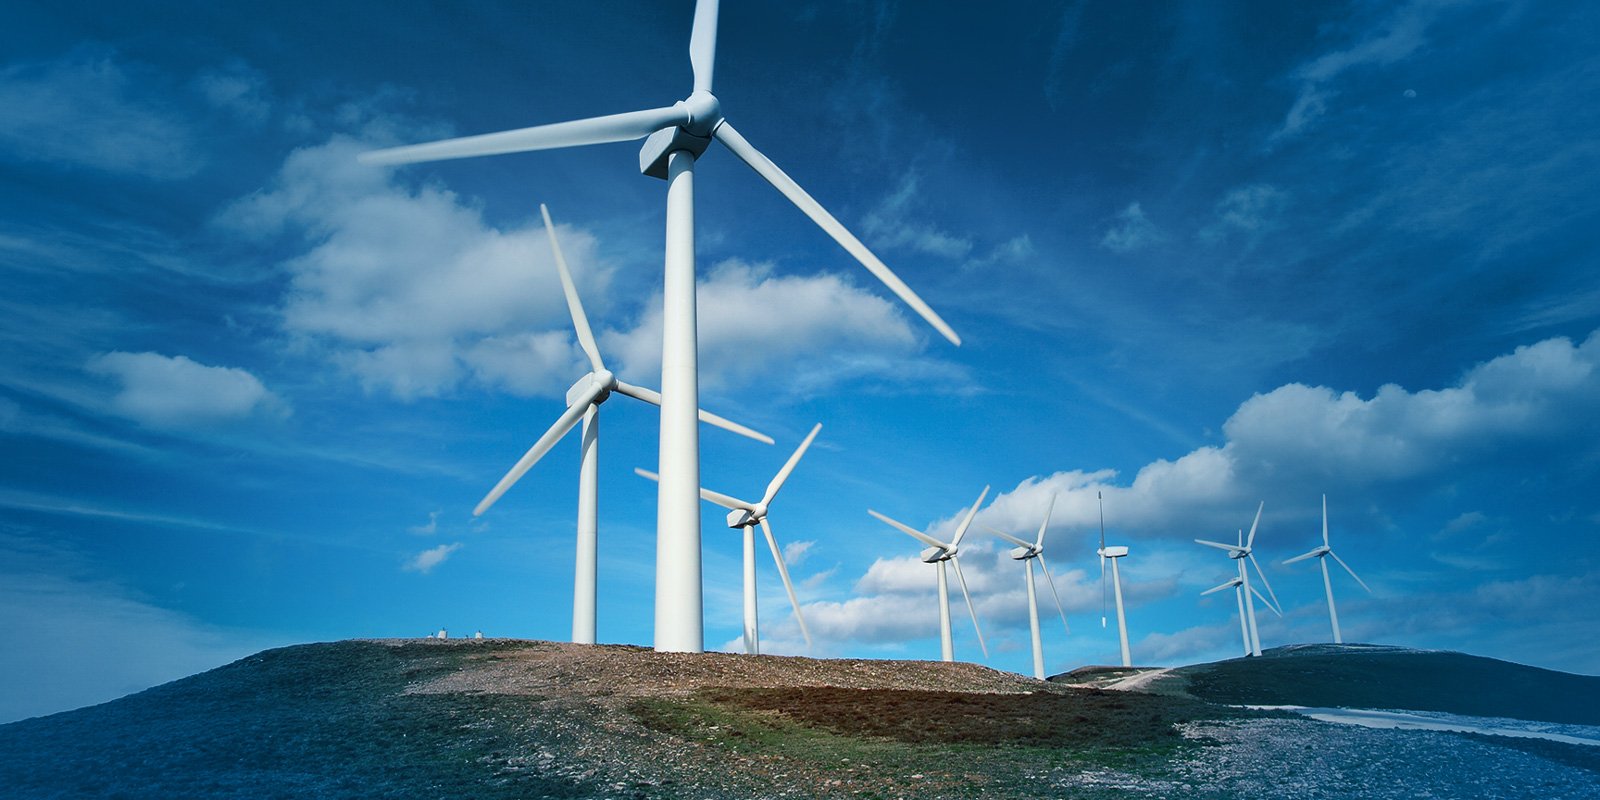 Taiwan Offshore Wind Farm Projects: Guiding Investors through the Legal and Regulatory Framework